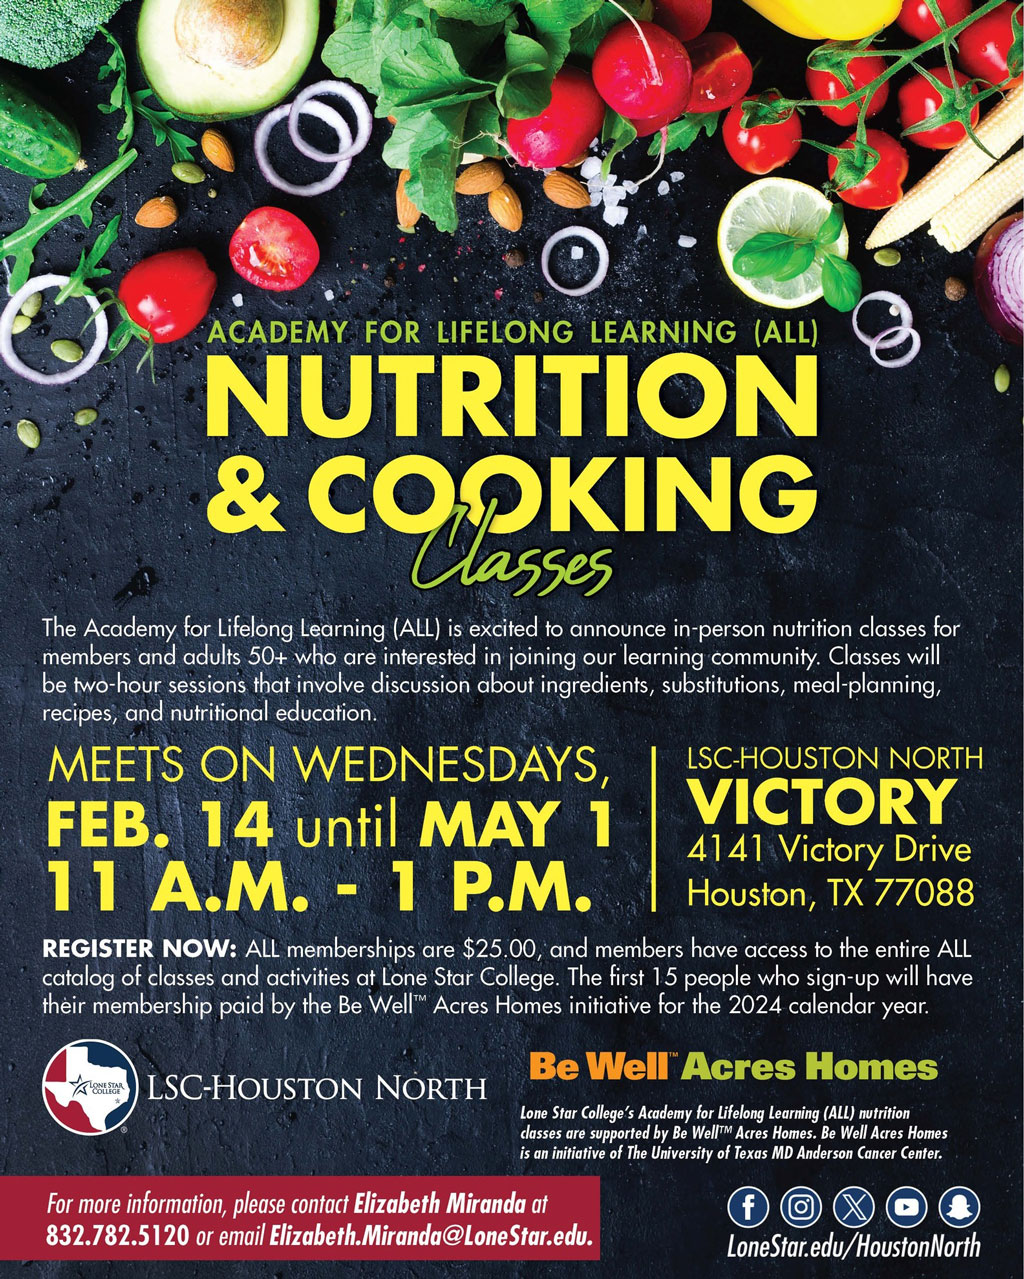 LSC Houston North Nutrition and Cooking Classes web